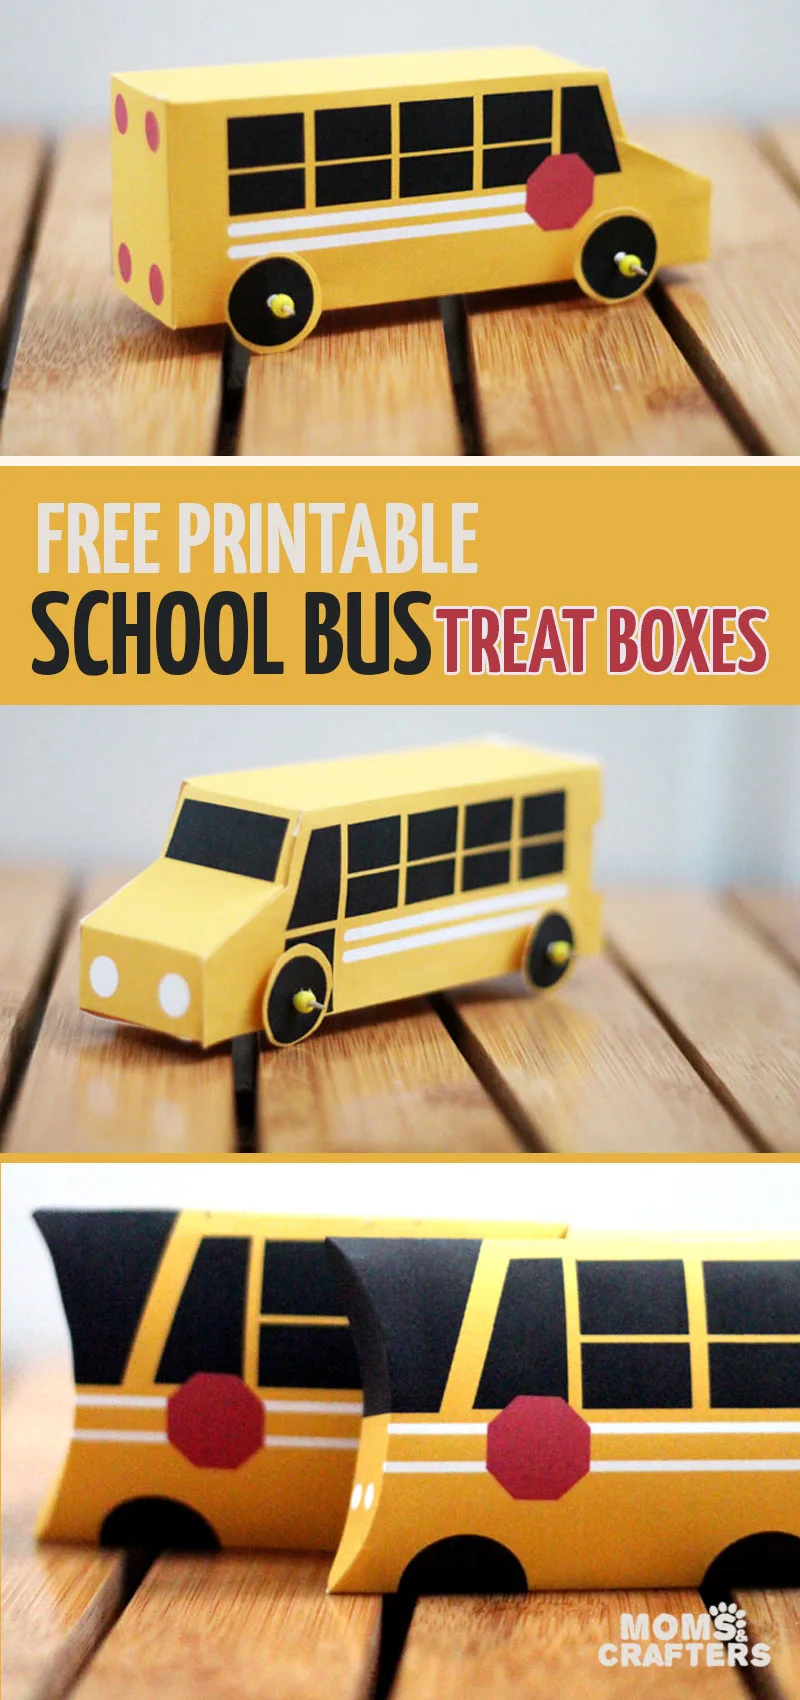 Click for the coolest free printable school bus pillow treat boxes and paper toys ever! These are wonderful for back to school lunch boxes or for end of year teacher gifts! #papercrafts #treatboxes #freeprintable